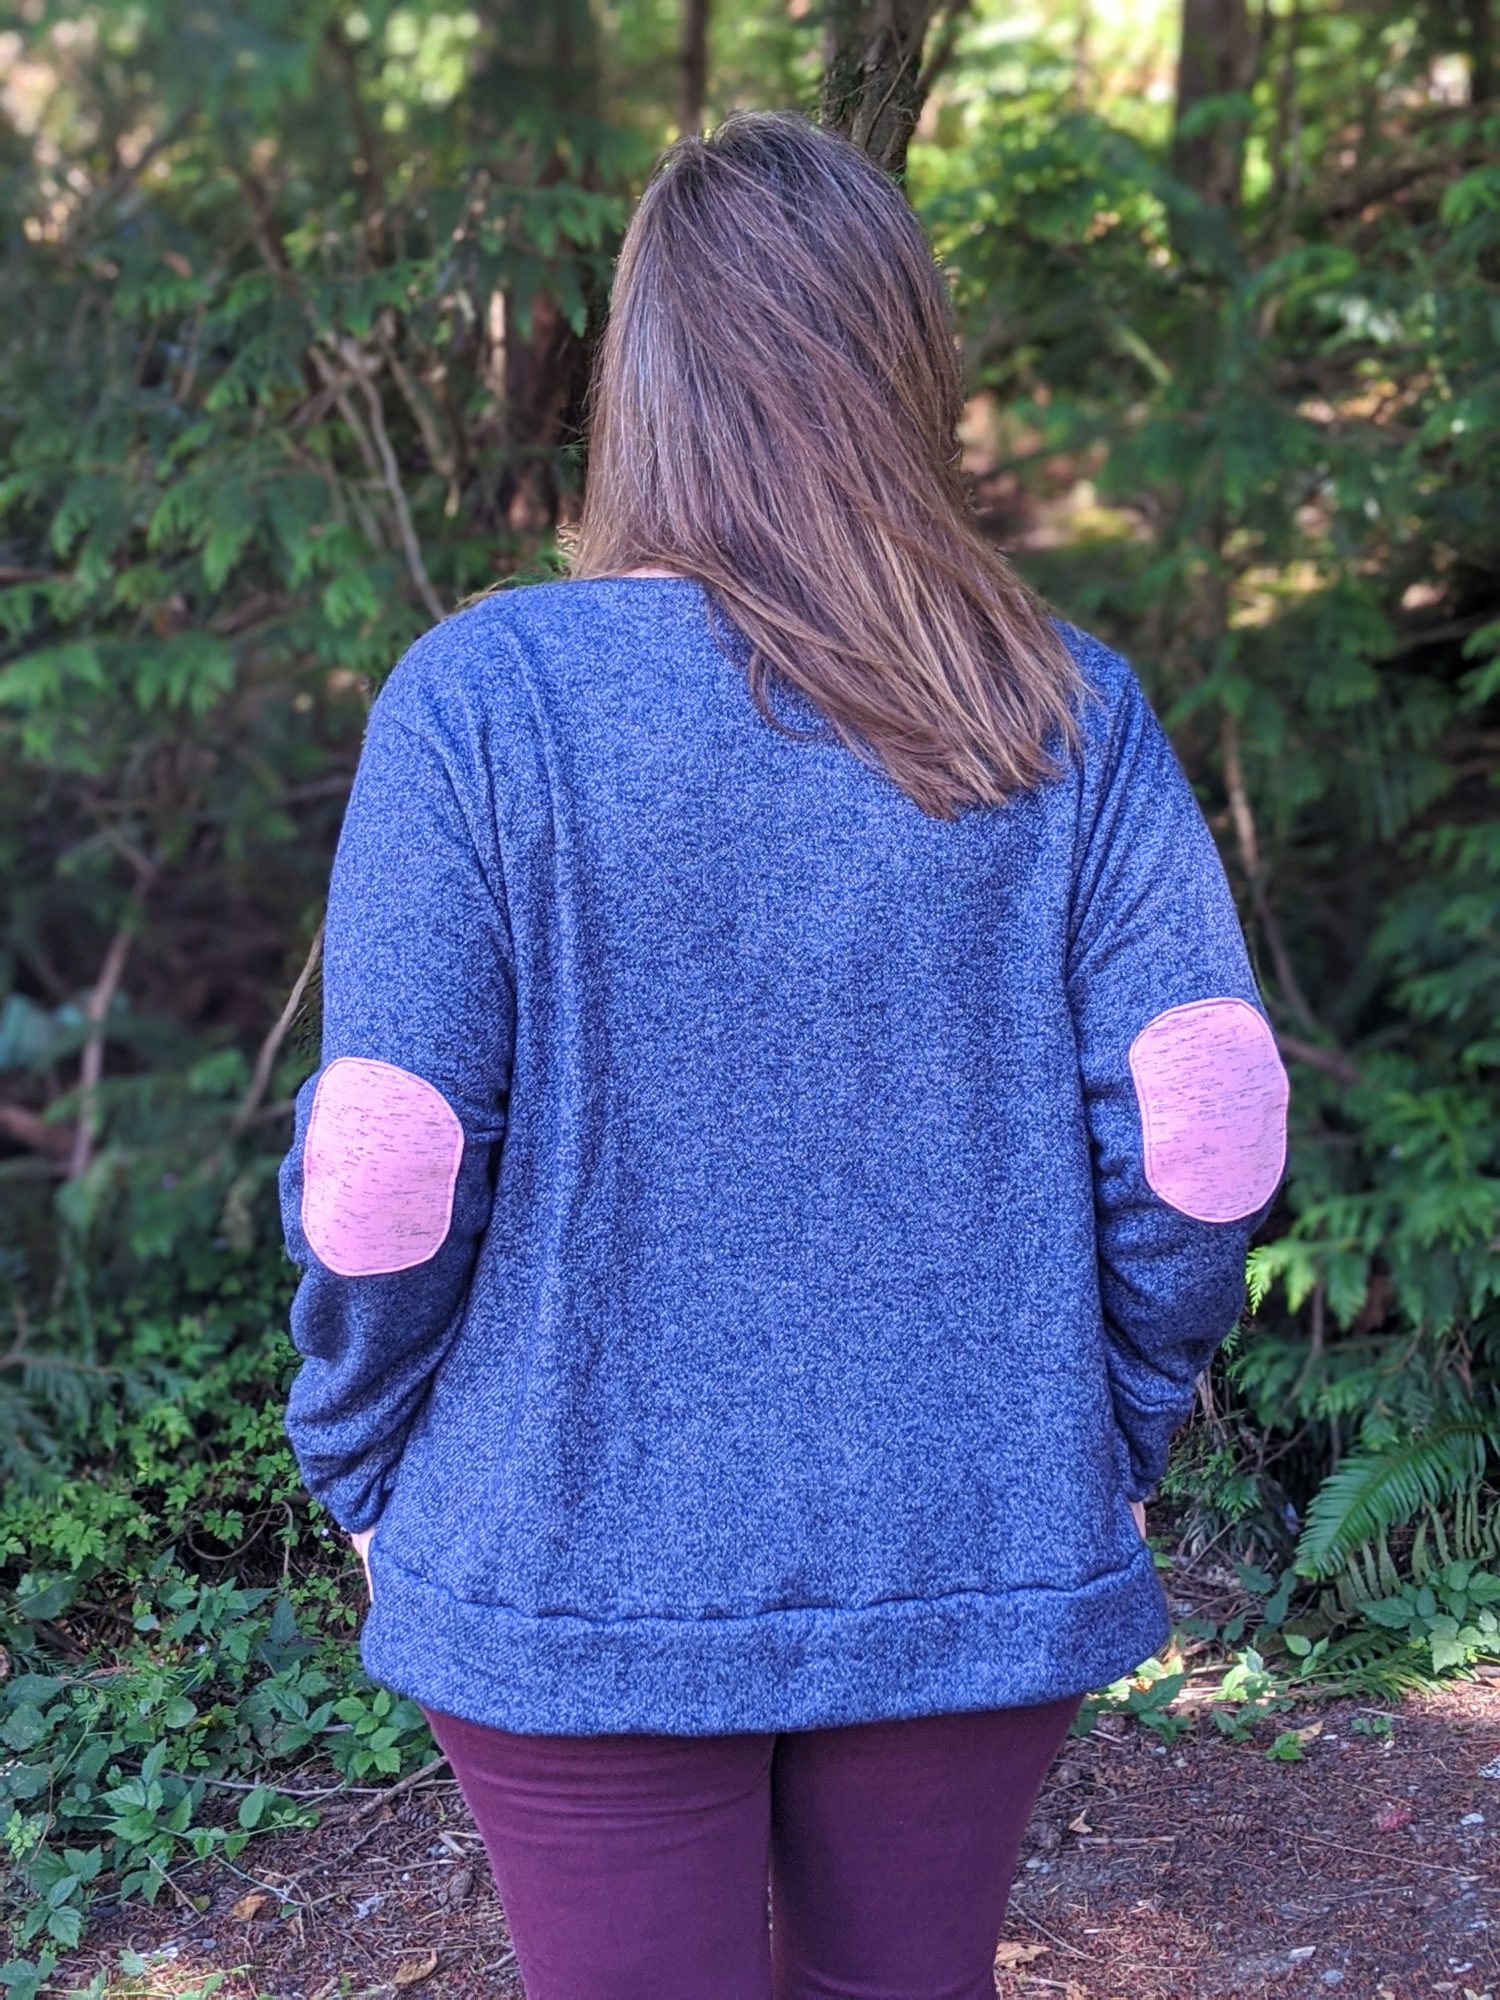 How to sew leather elbow patches onto your cardigan and sweater